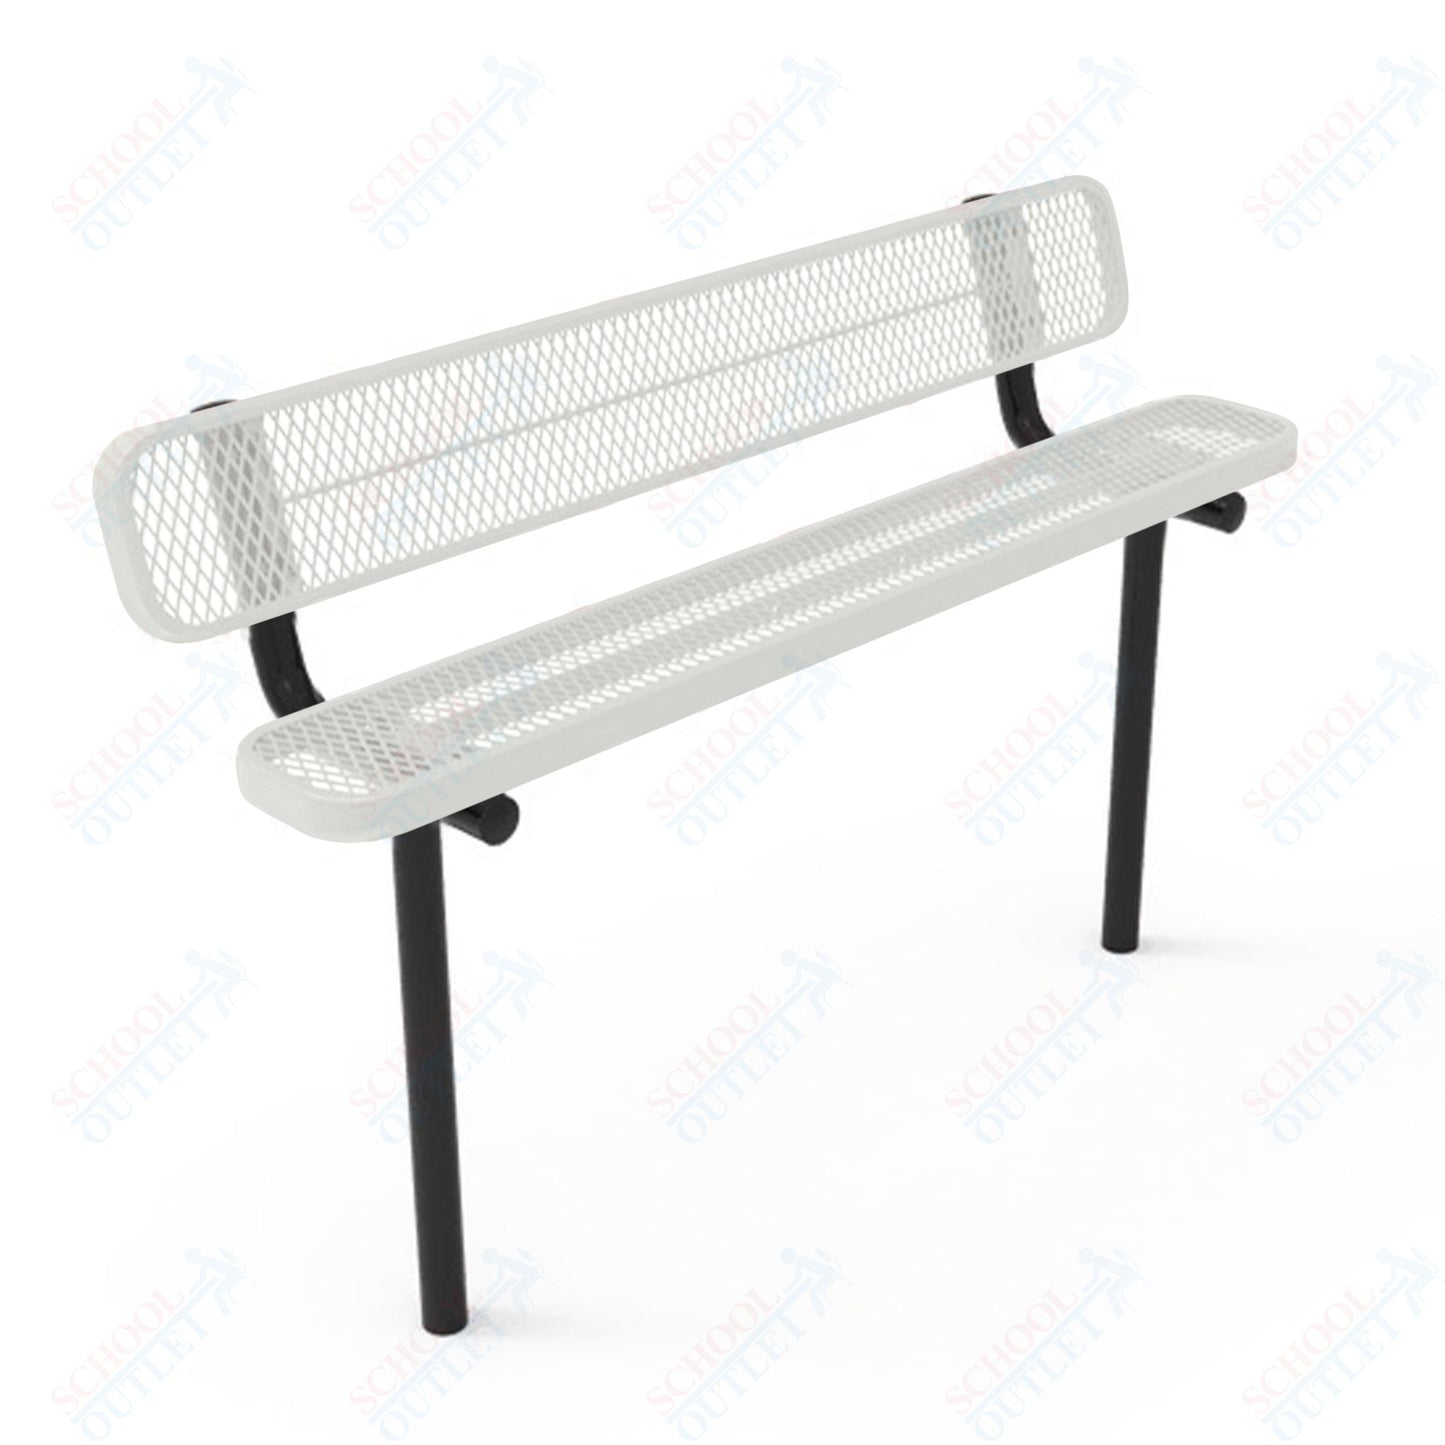 MyTcoat - Standard Outdoor Bench with Back - Inground Mount 6' L (MYT-BRT06-19)